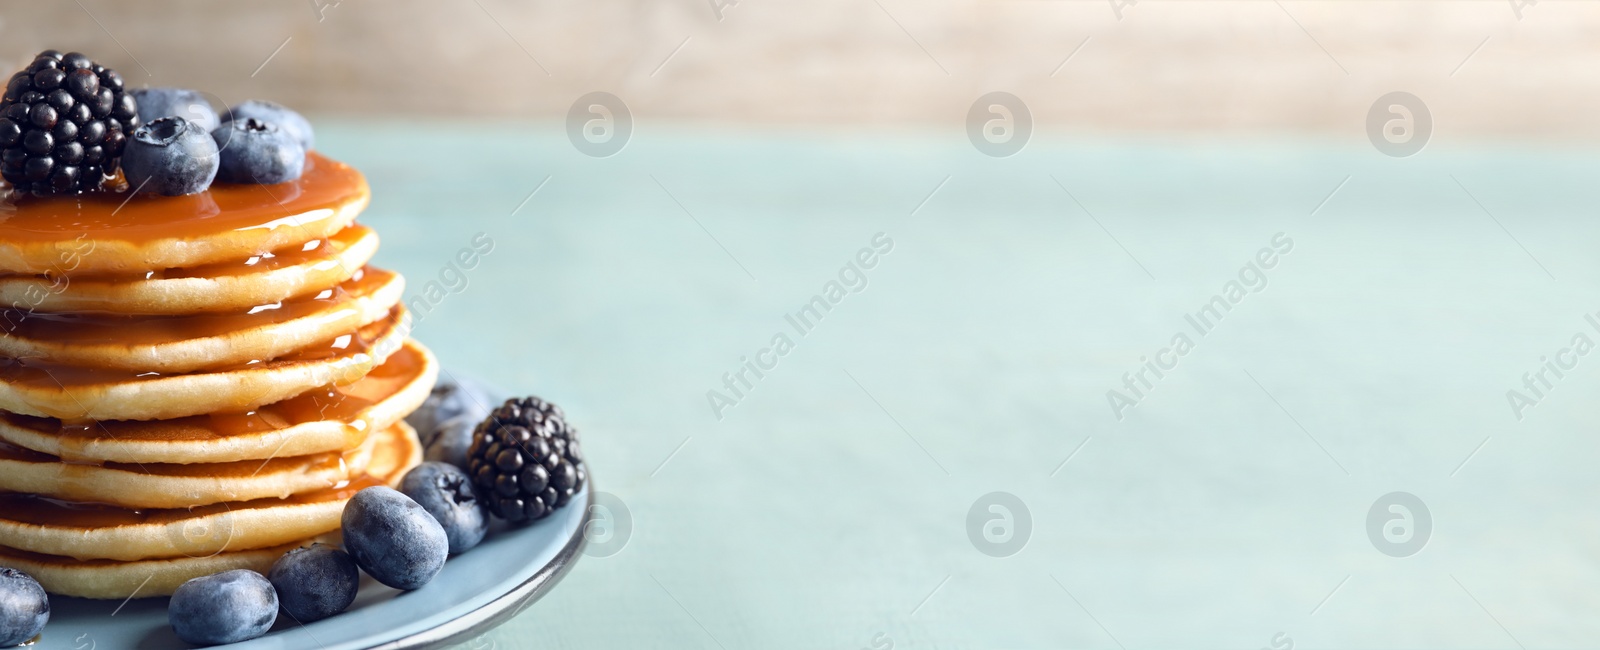 Image of Tasty pancakes with berries and syrup on plate, space for text. Banner design